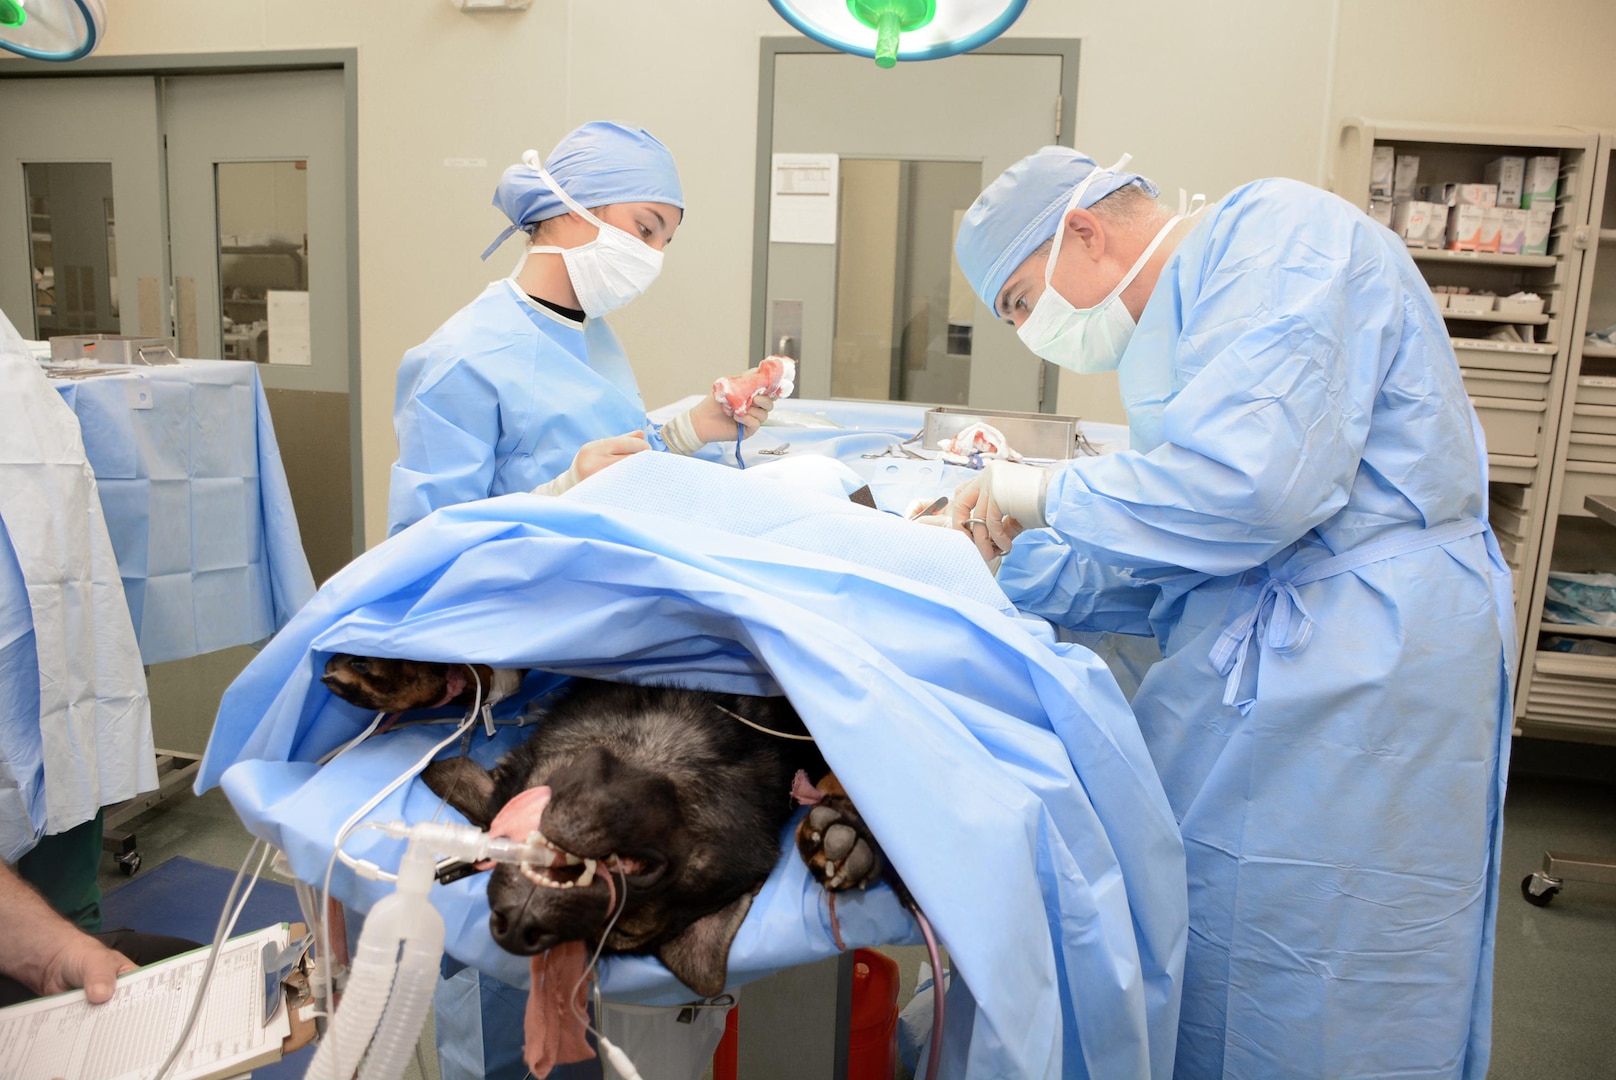 Maj. Patrick Grimm, Deputy Chief of Animal Health Branch, performs a gastropexy on a Customs and Border Patrol working dog while assisted by Pvt. Jade Baxter, a student attending Army Animal Care Specialist, 68T, advanced individual training.